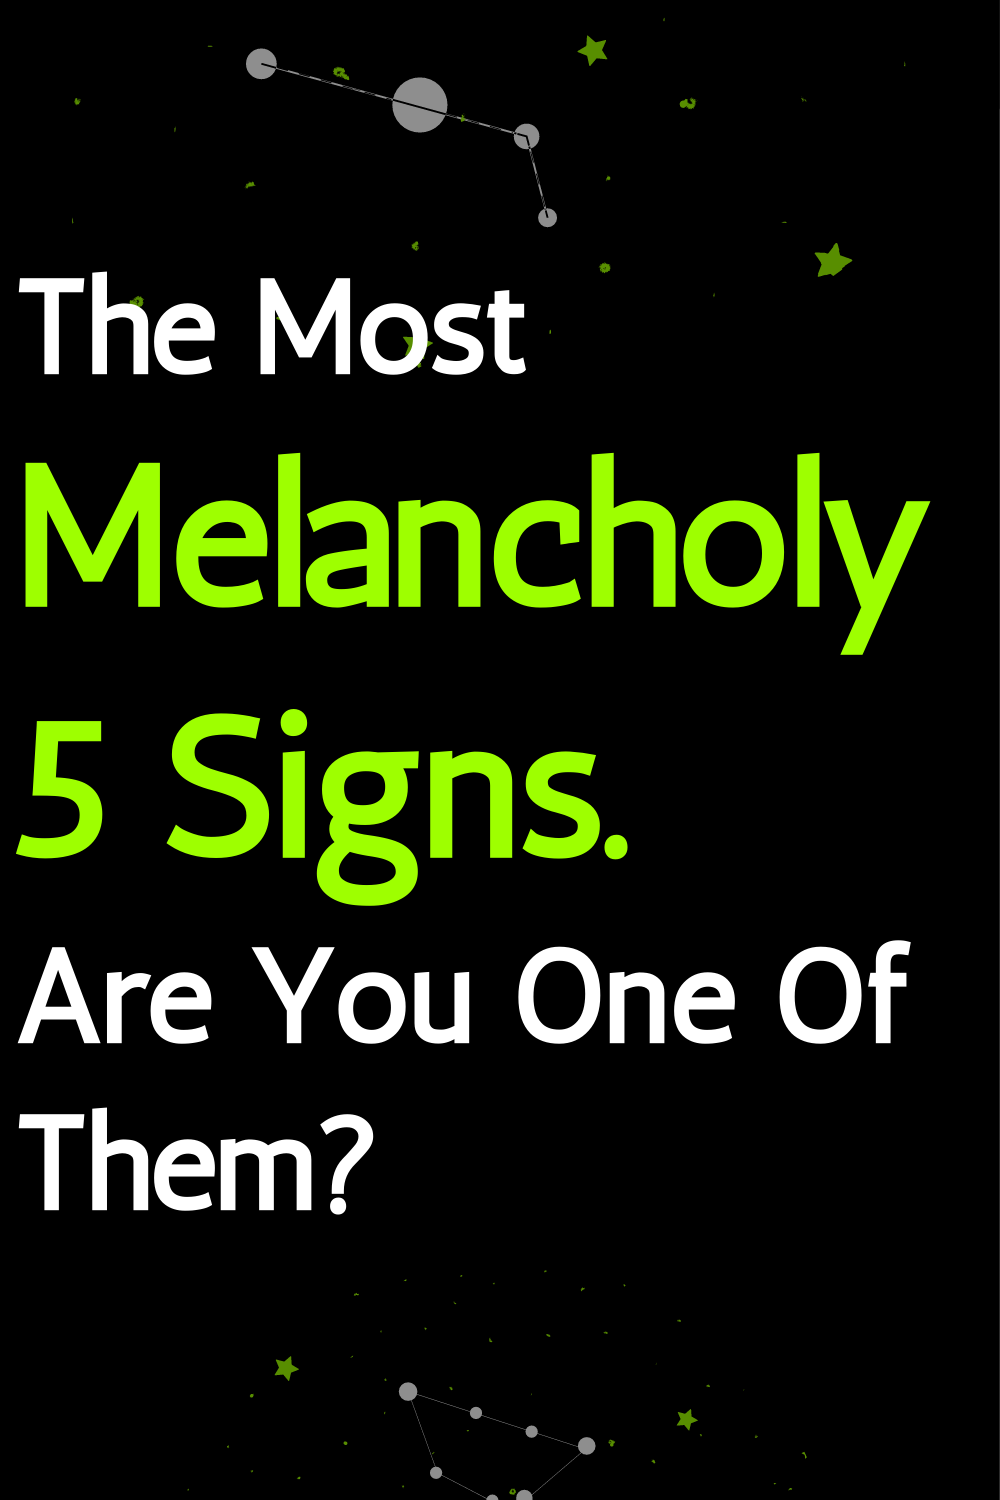 The Most Melancholy 5 Signs. Are You One Of Them?